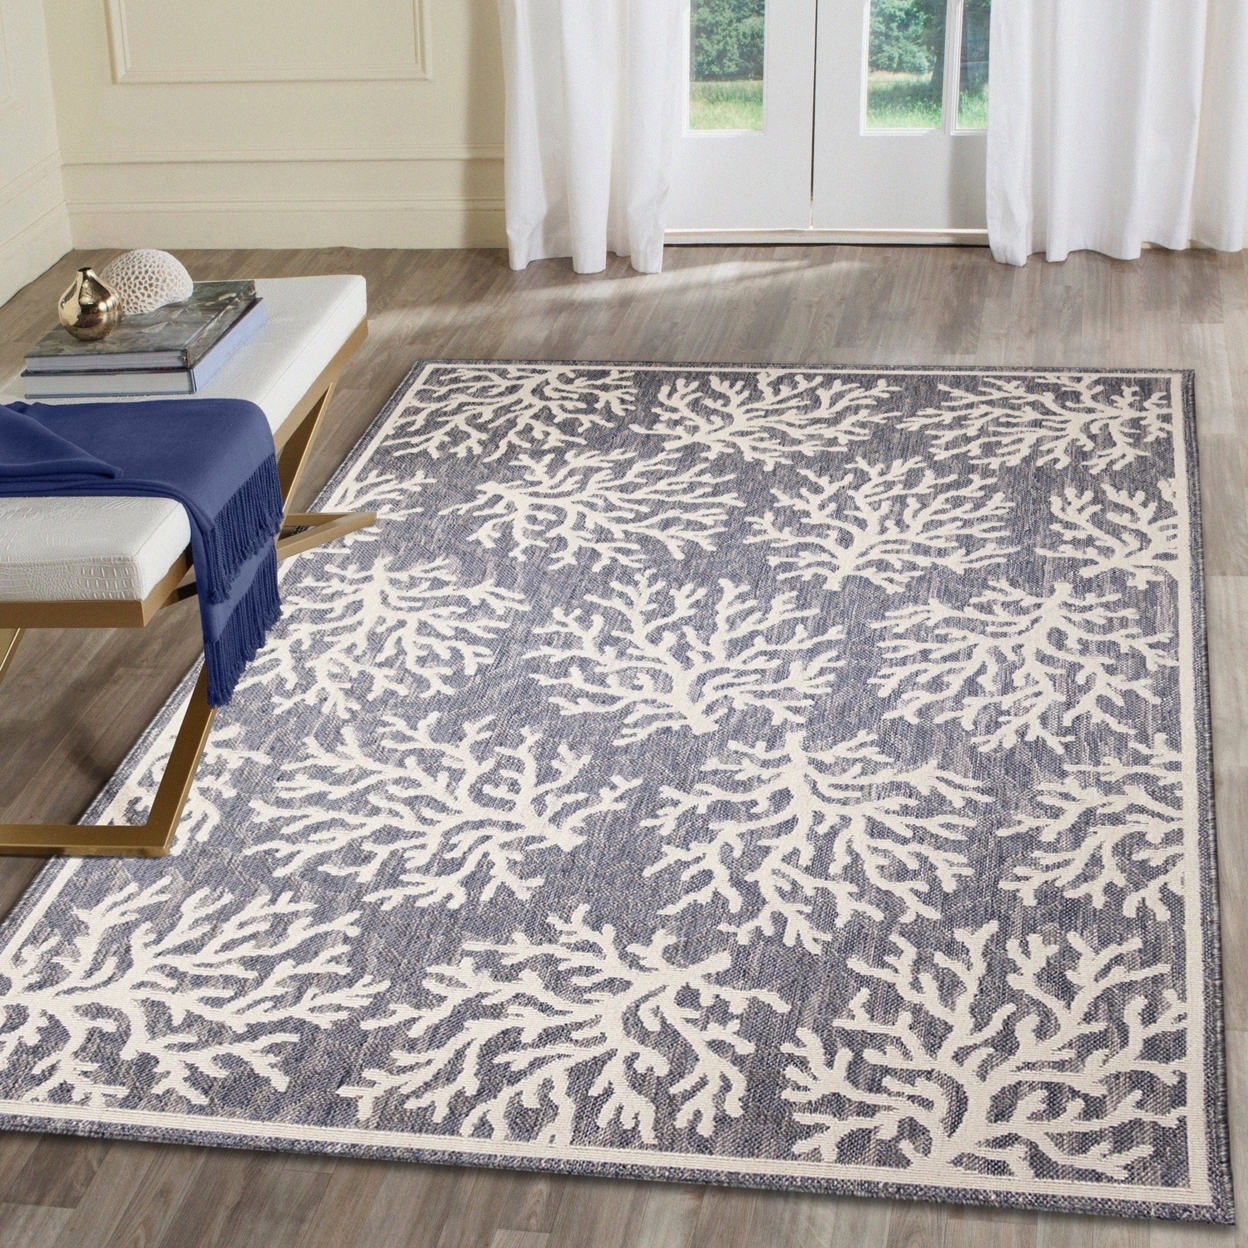 Liora Manne Cove Coral Indoor Outdoor Area Rug Blue - 7'10 X 9'10